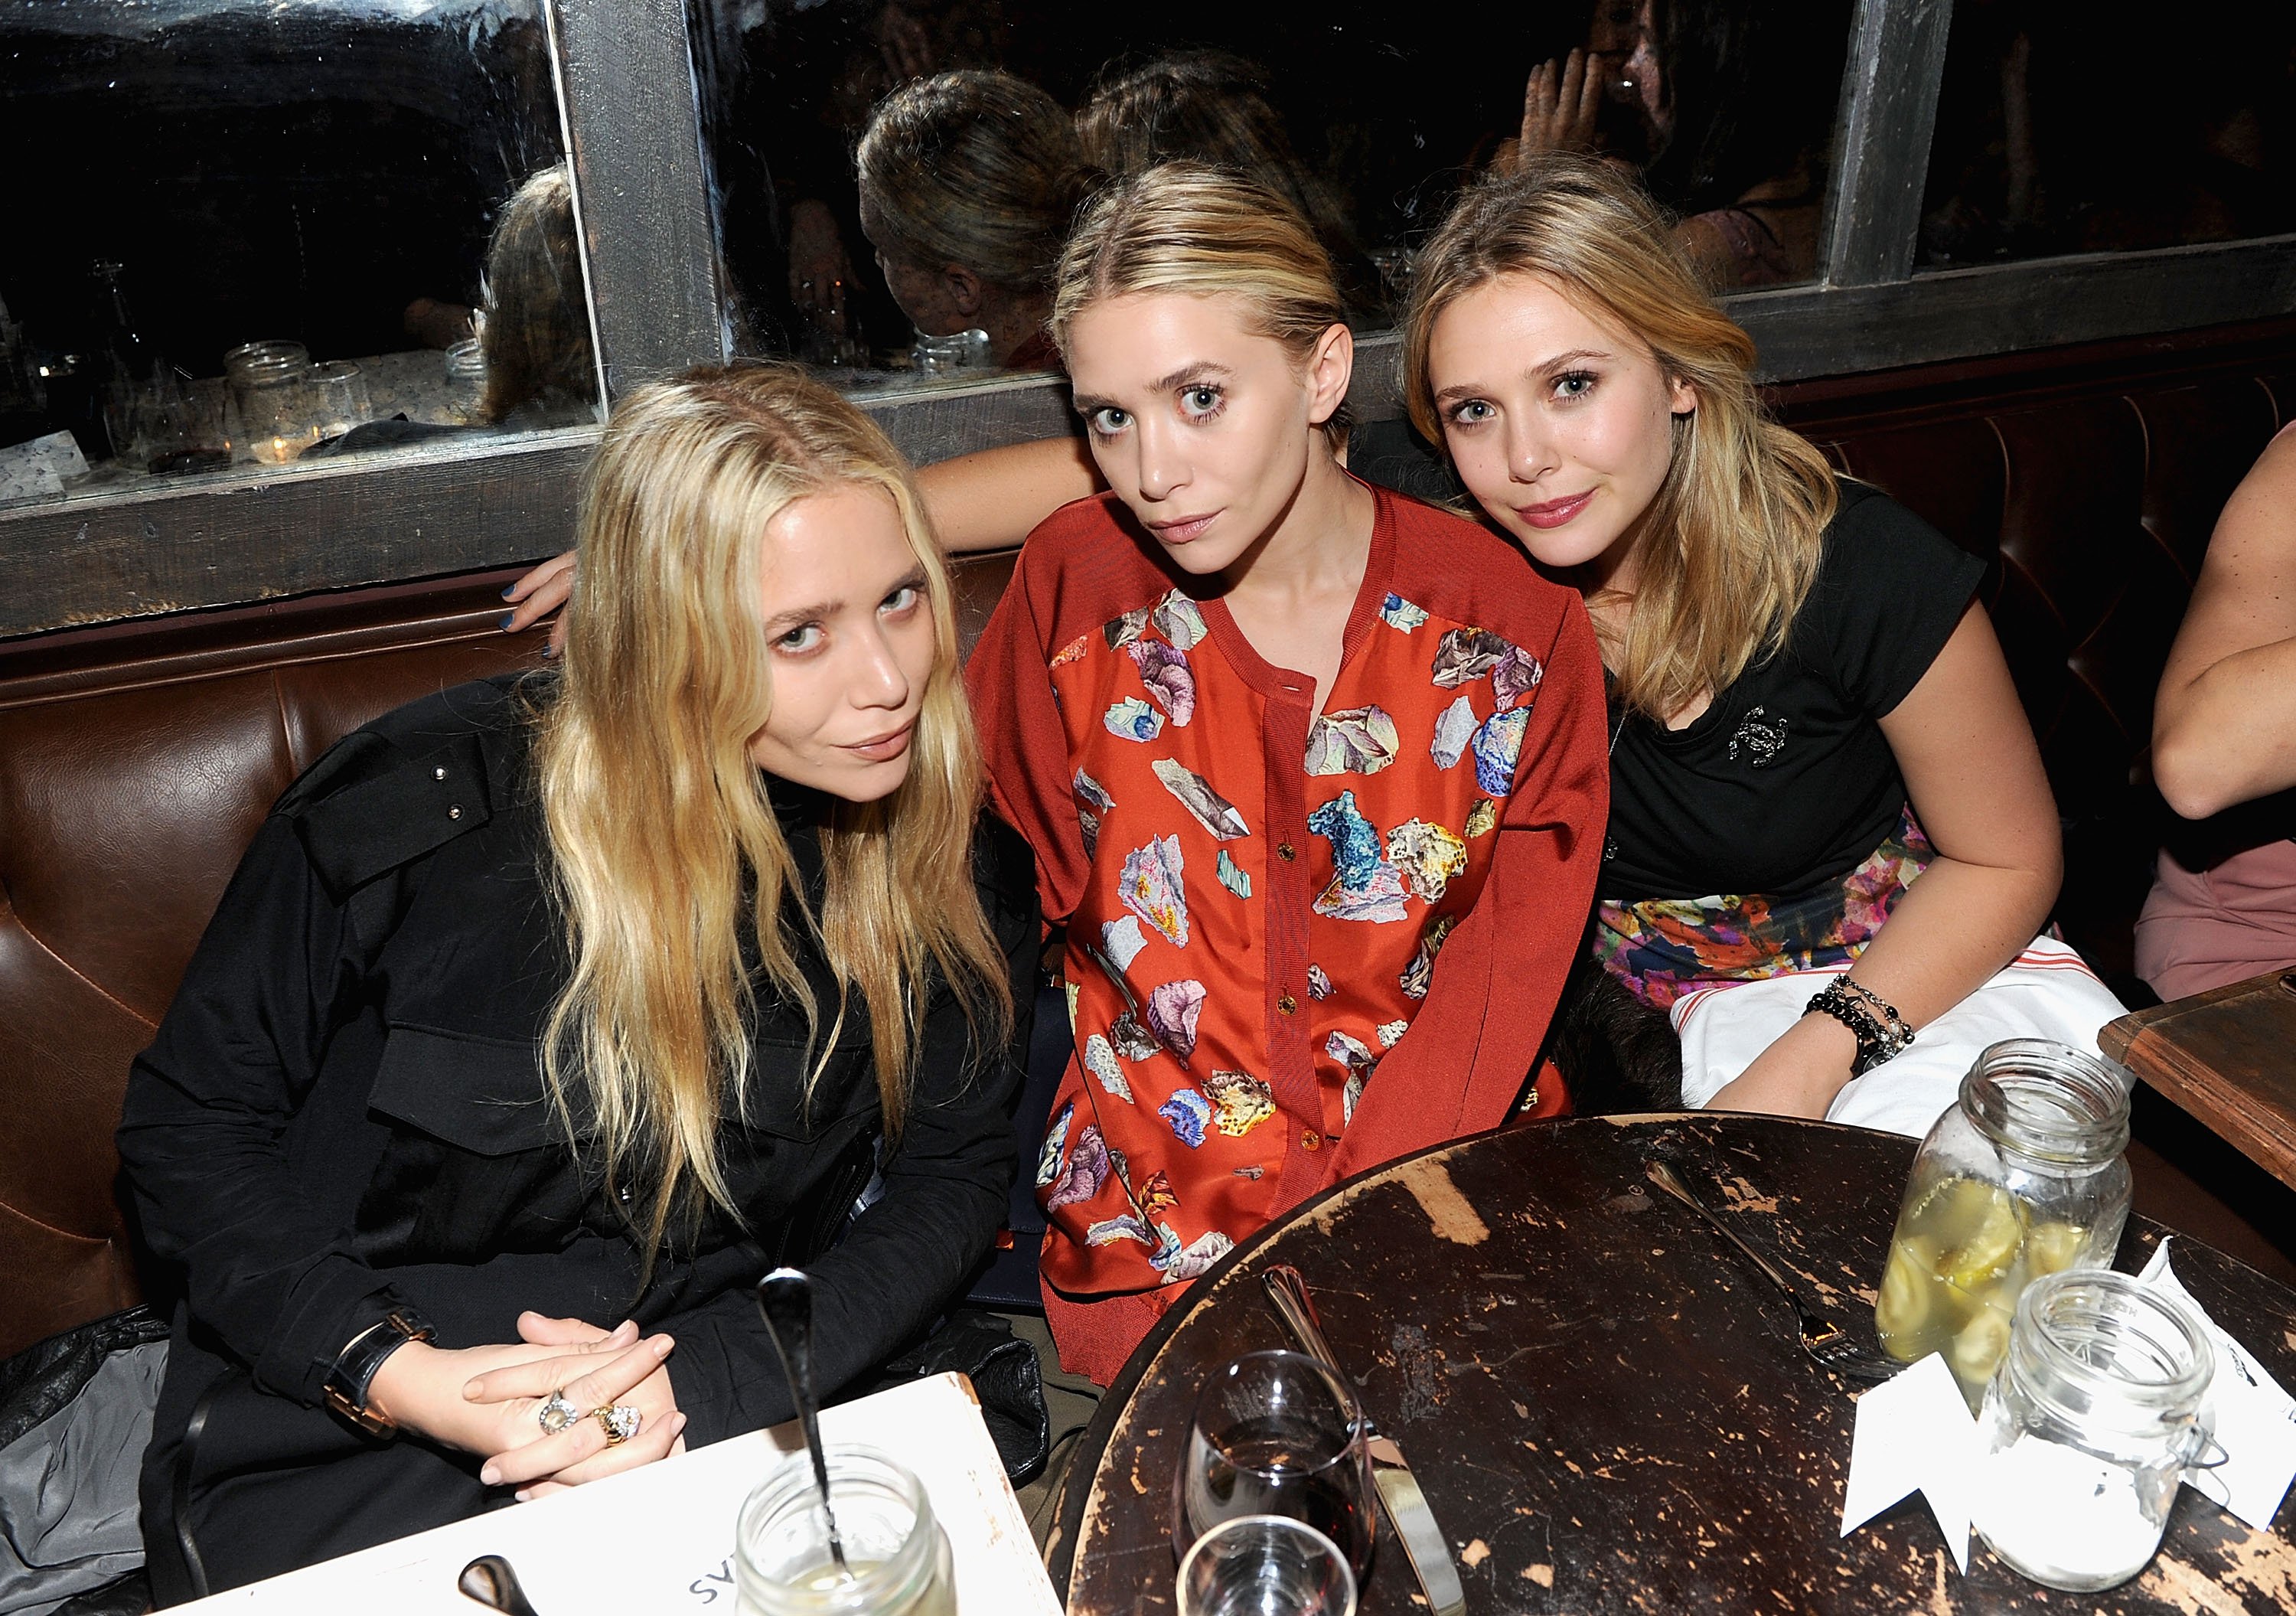 Mary-Kate Olsen in a black outfit, Ashley Olsen in a red outfit and Elizabeth Olsen in a black outfit.